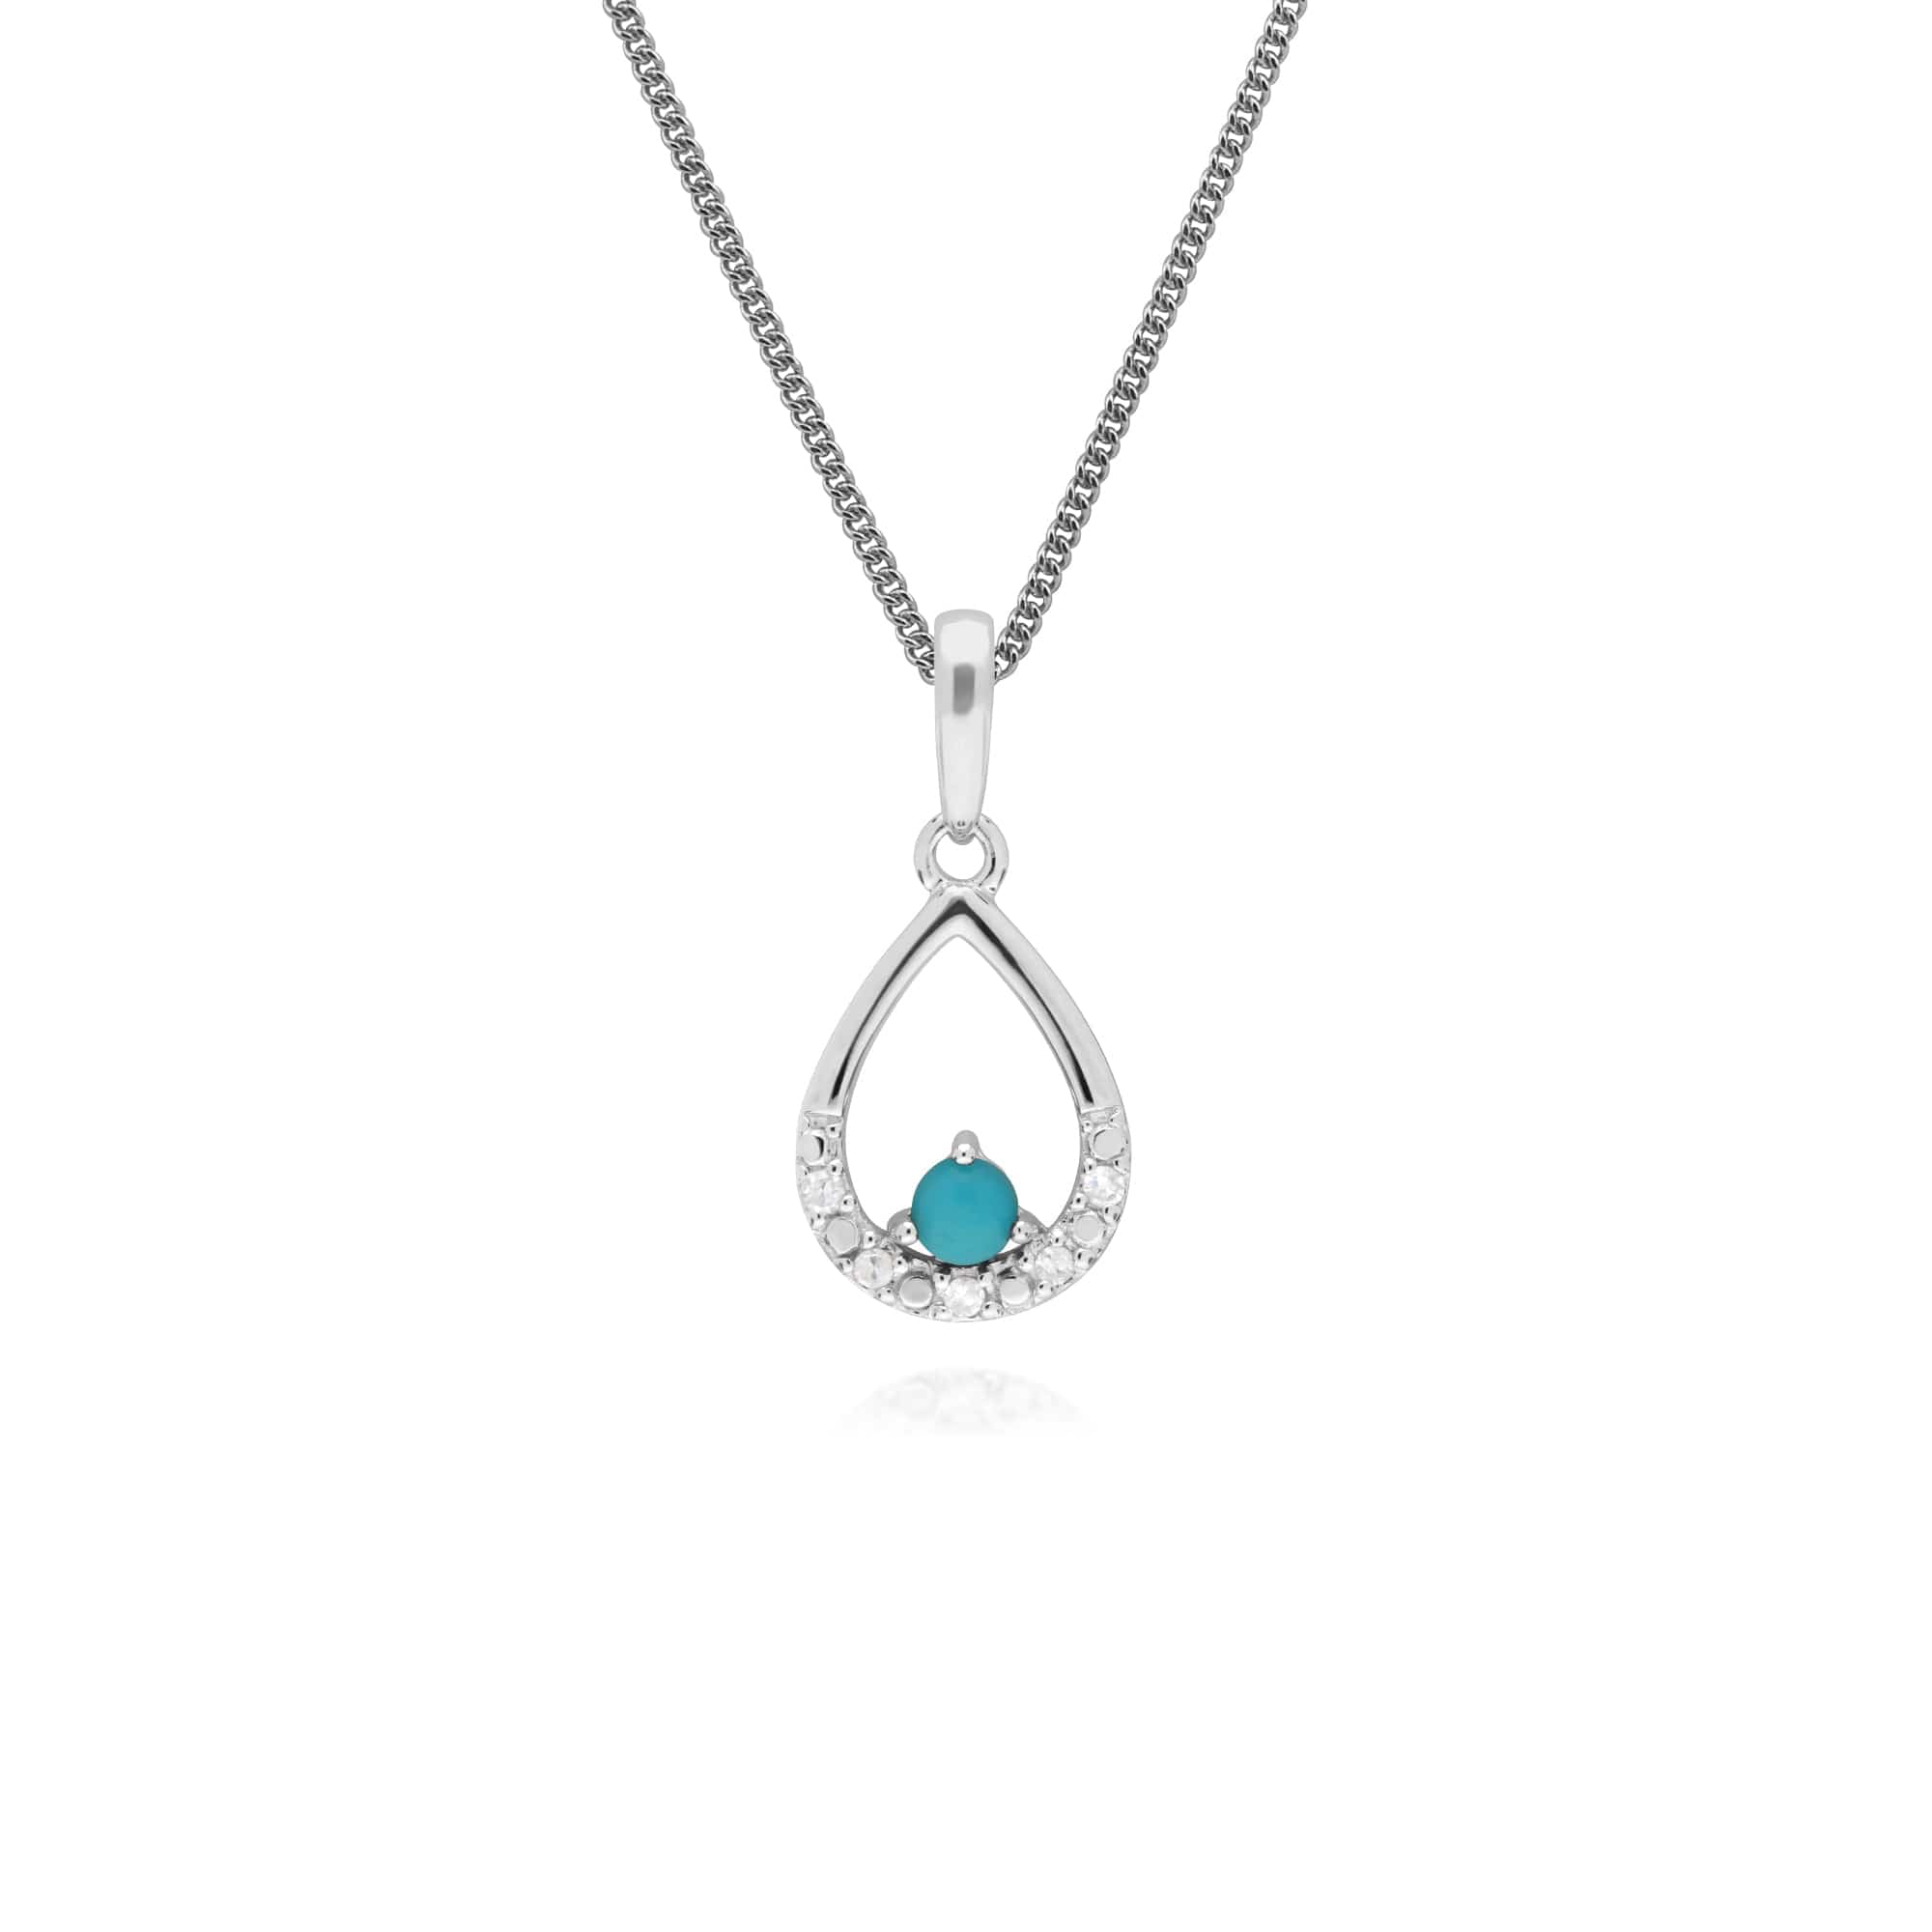 162E0261019-162P0222019 Classic Round Turquoise & Diamond Pear Drop Earrings & Pendant Set in 9ct White Gold 3